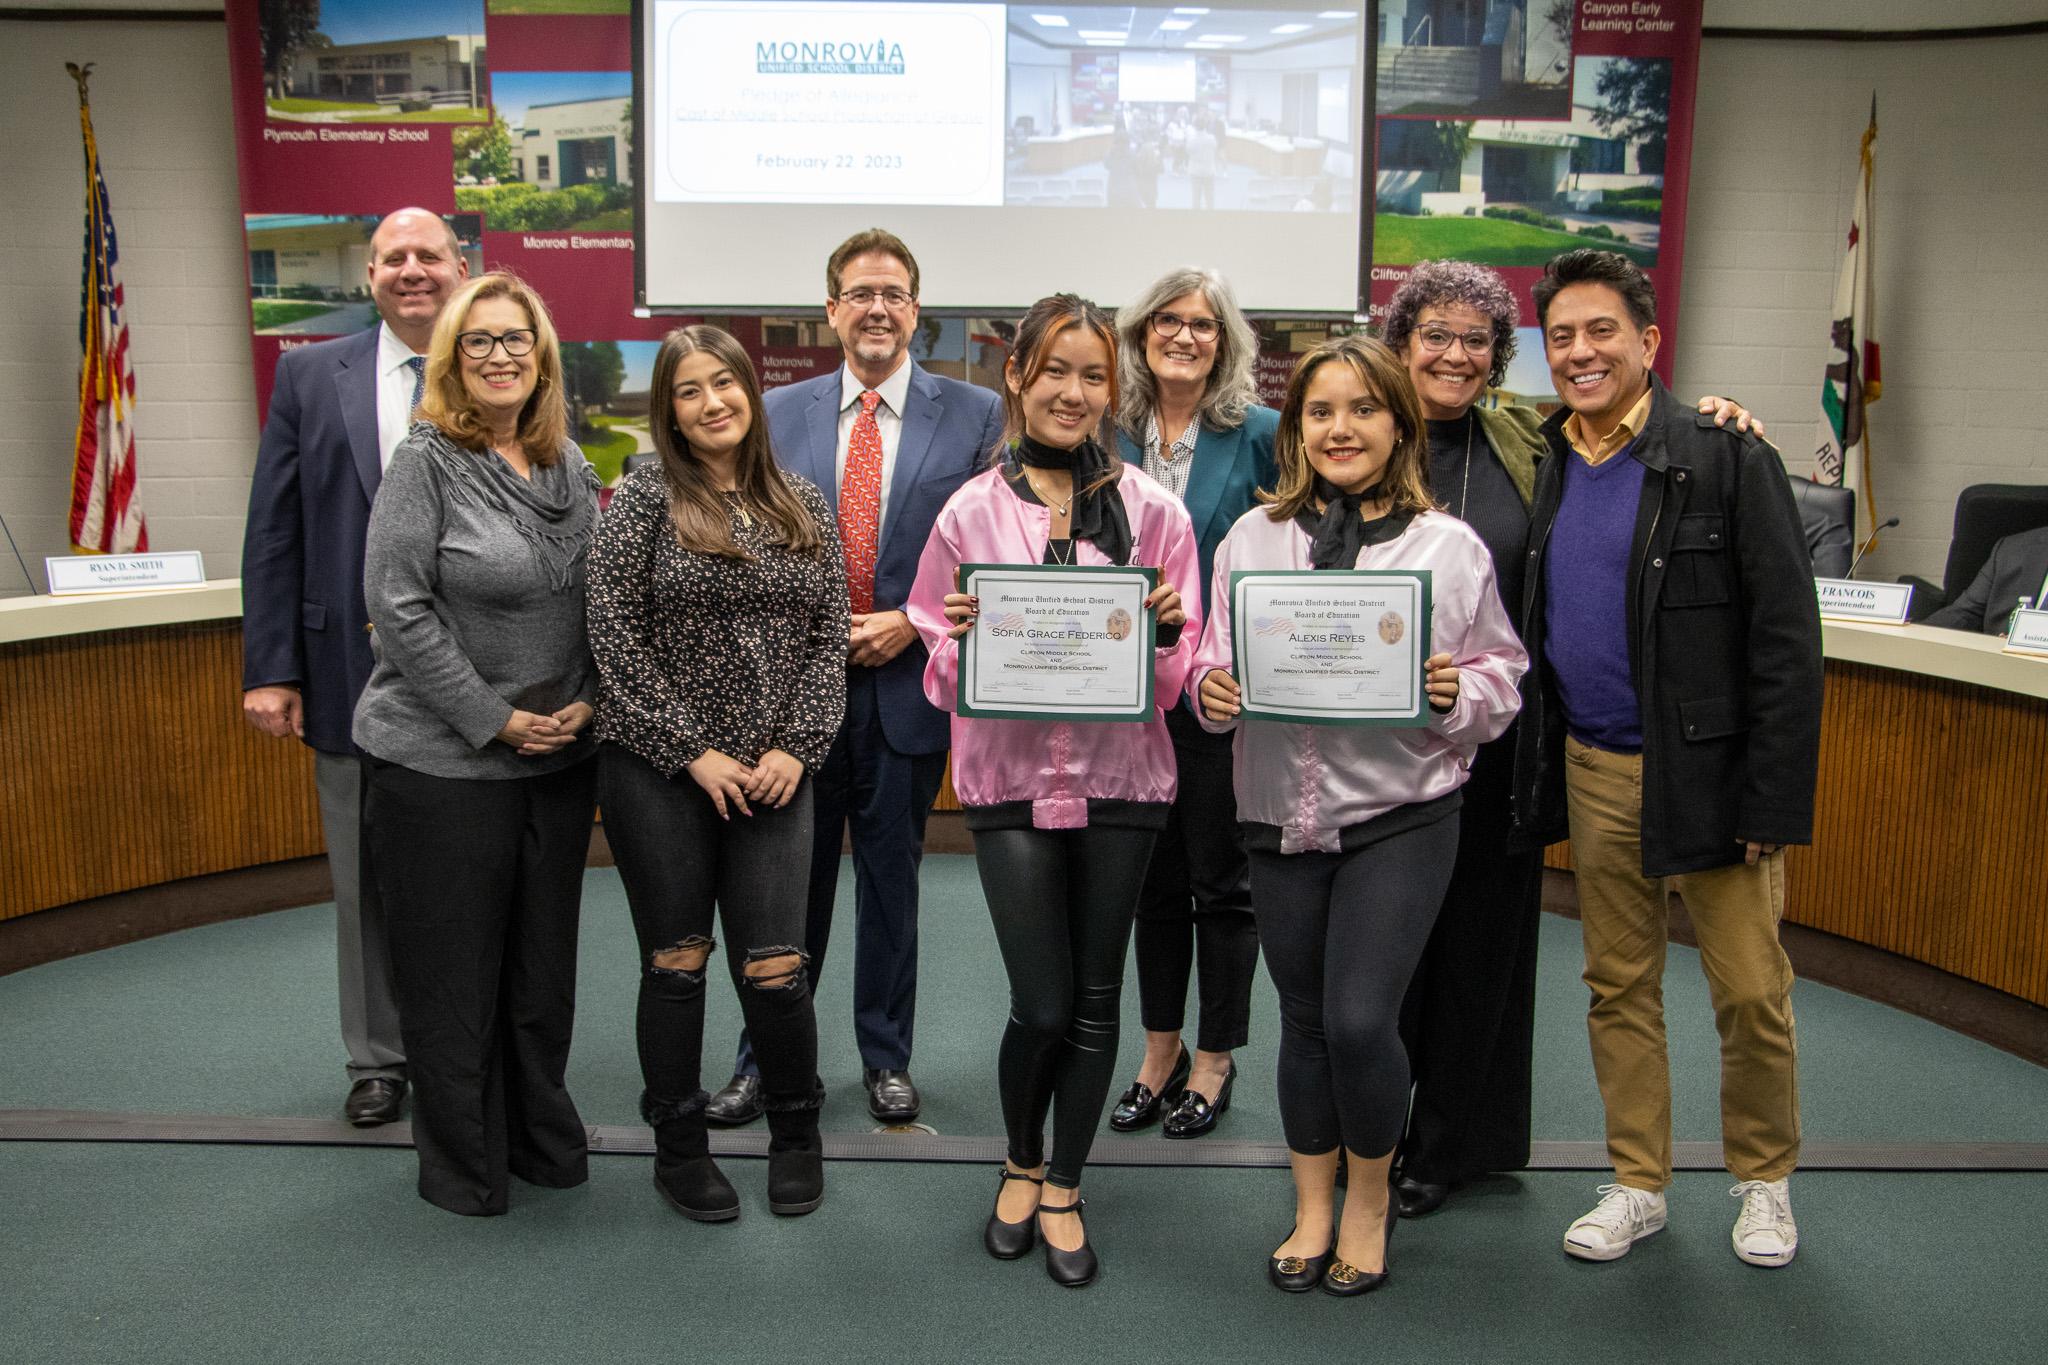 The Monrovia Unified School District Board of Education invited students from Monrovia High School’s Project Lead the Way Engineering Pathway and middle school students from the upcoming production of Grease to lead the Pledge of Allegiance.